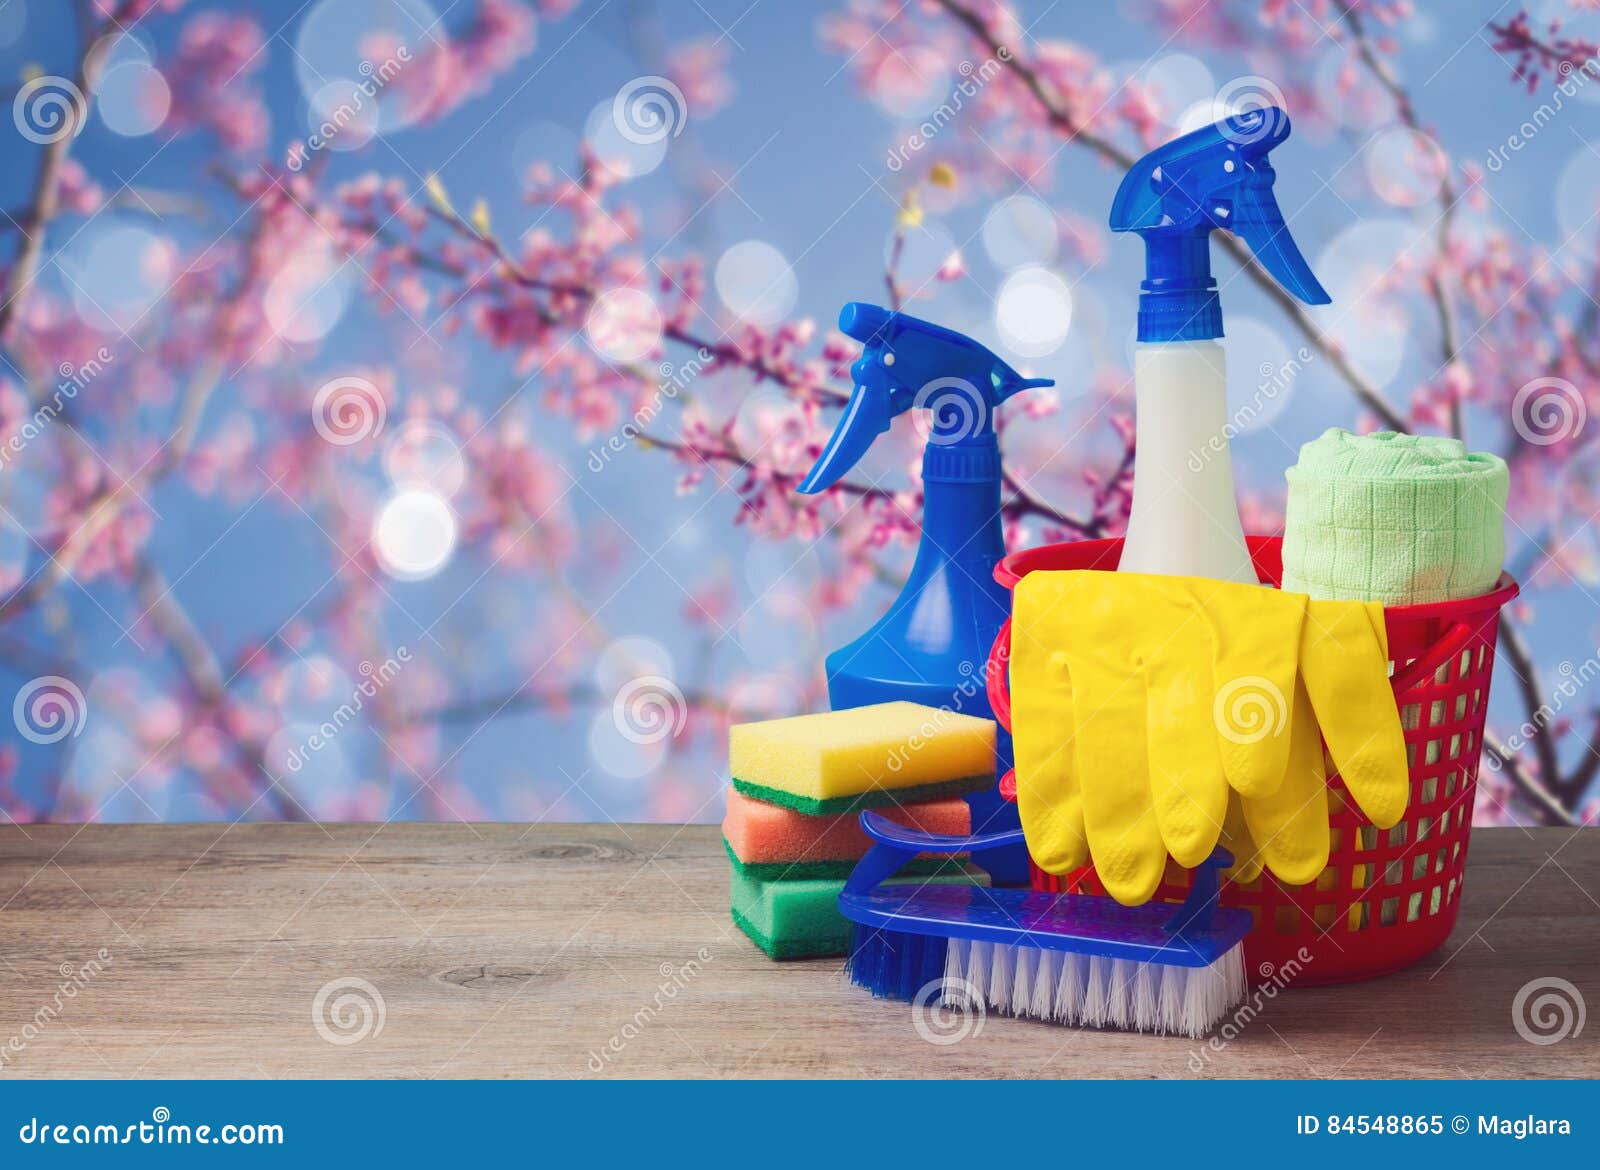 Cleaning Service Background Images  Free Download on Freepik